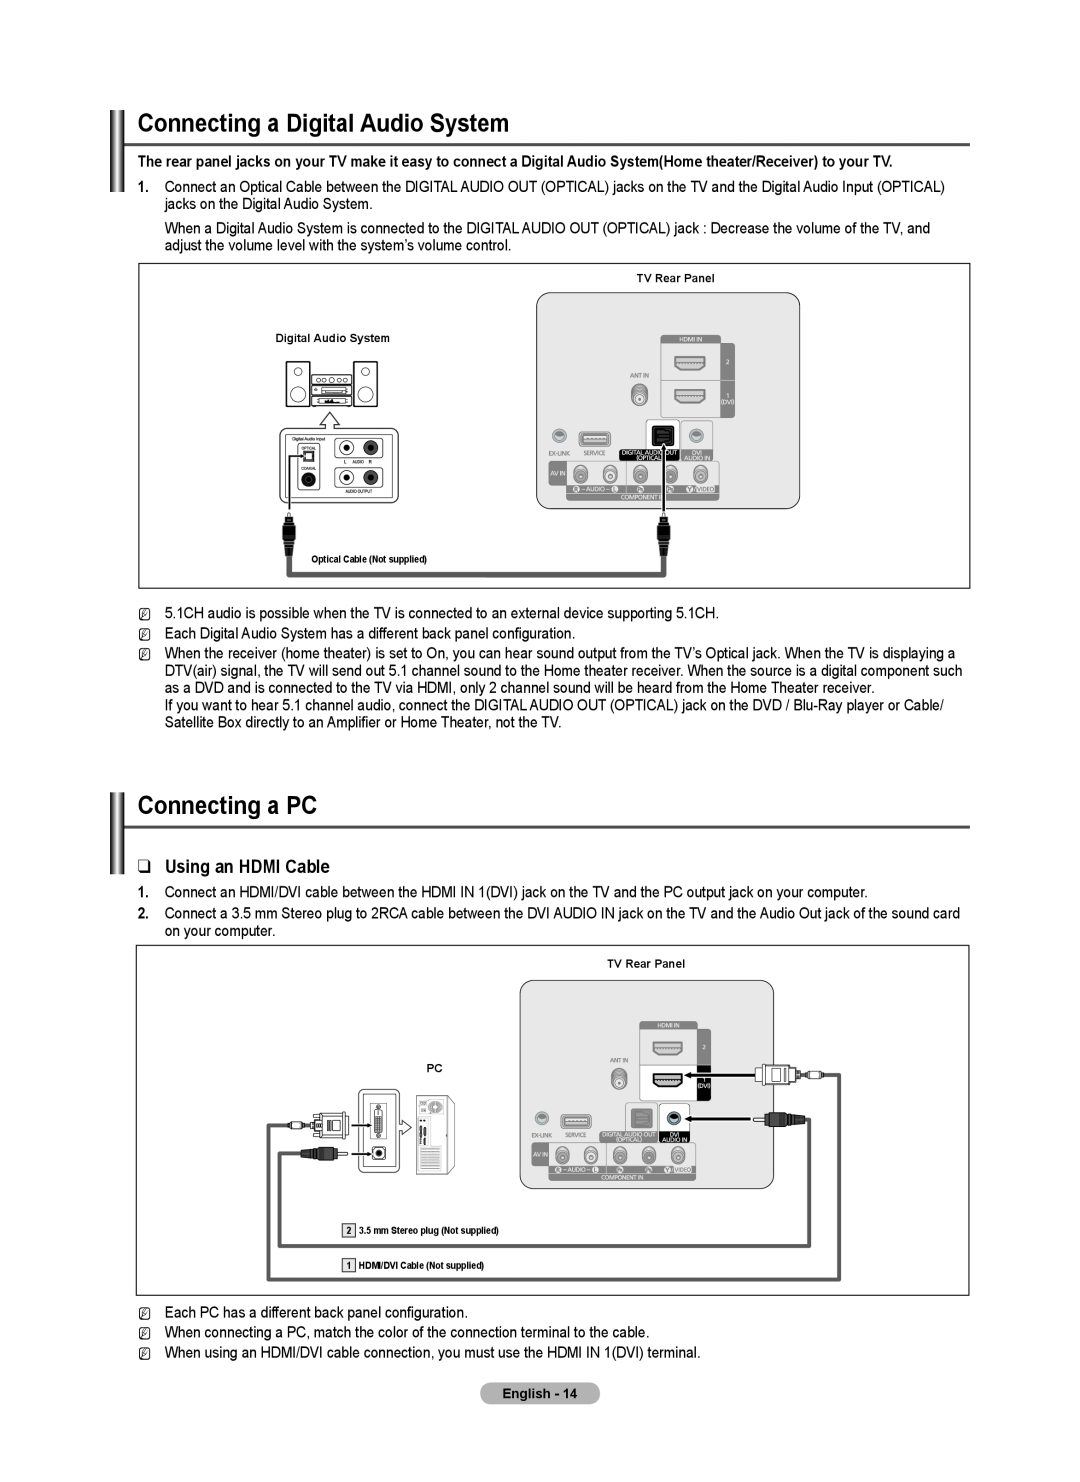 Samsung BN68-02426A-00 user manual Connecting a Digital Audio System, Connecting a PC, Using an HDMI Cable 